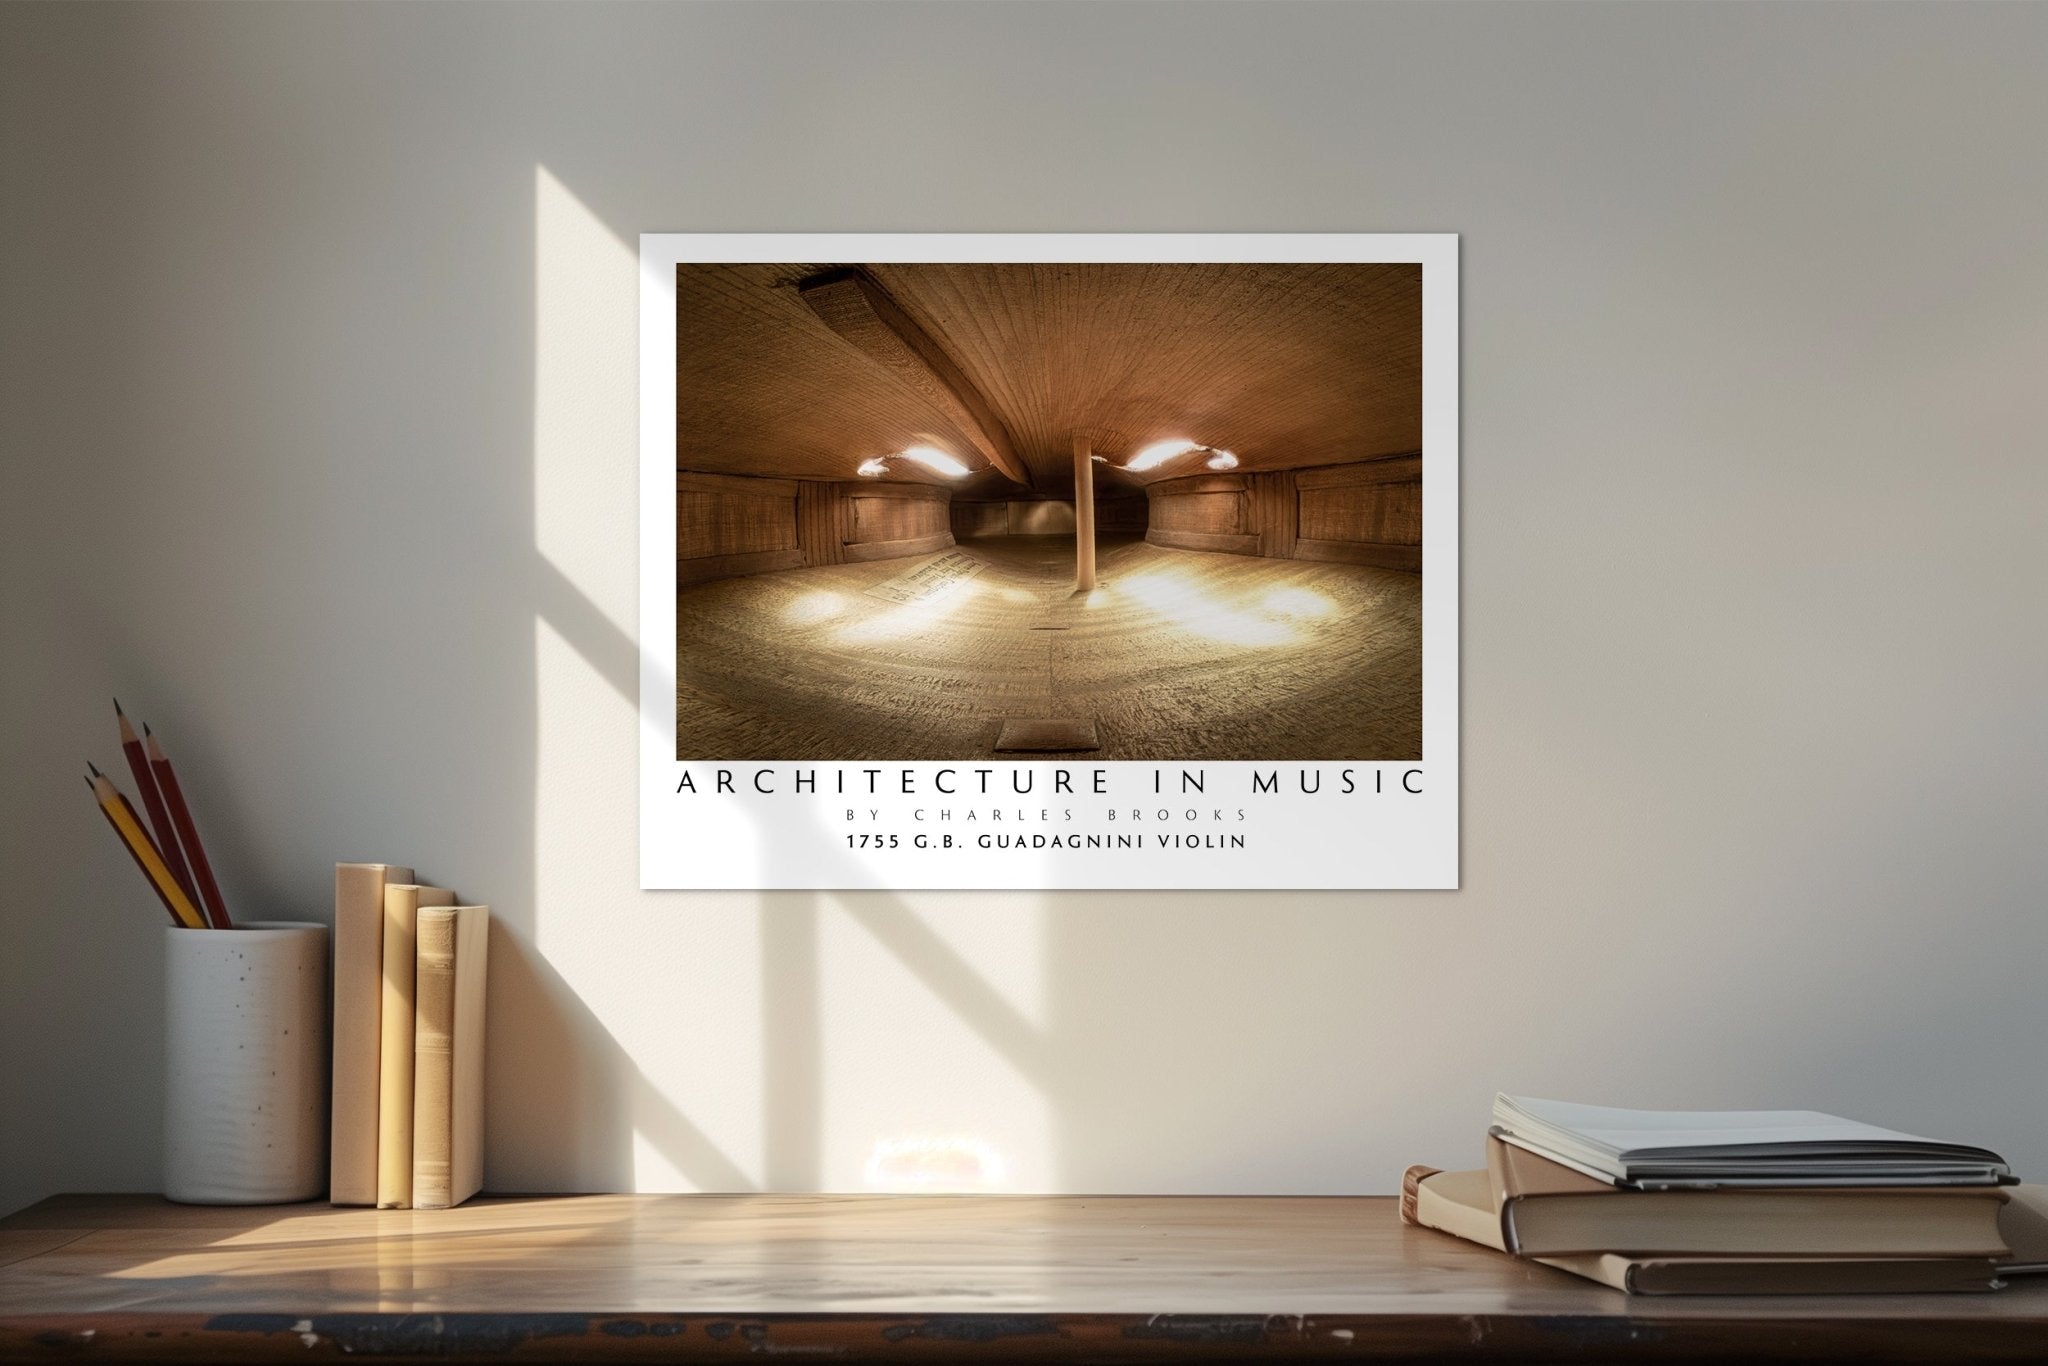 Photo of 1755 G.B. Guadagnini Violin. High Quality Poster. - Giclée Poster Print - Architecture In Music